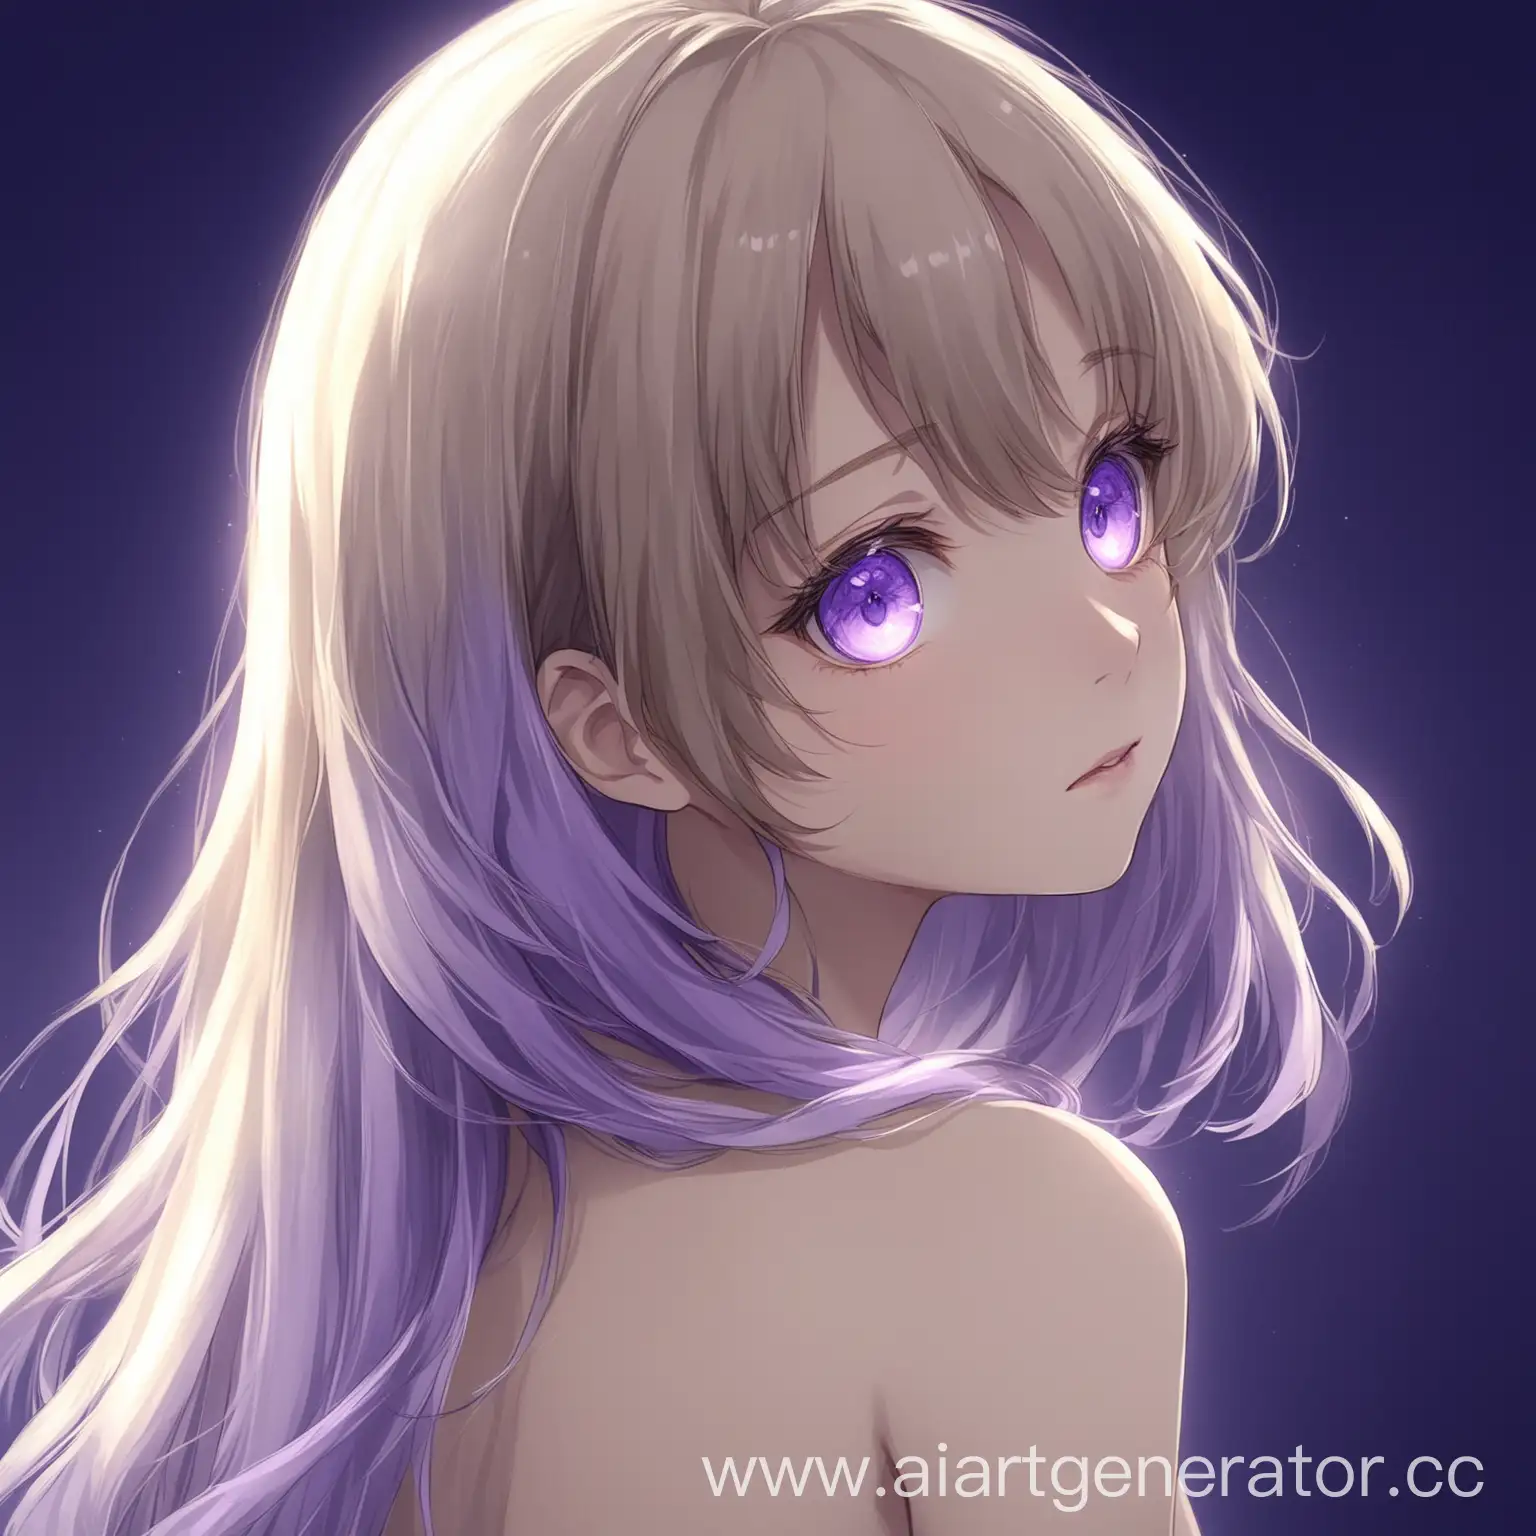 Anime-Girl-with-Light-Brown-Hair-and-Lavender-Eyes